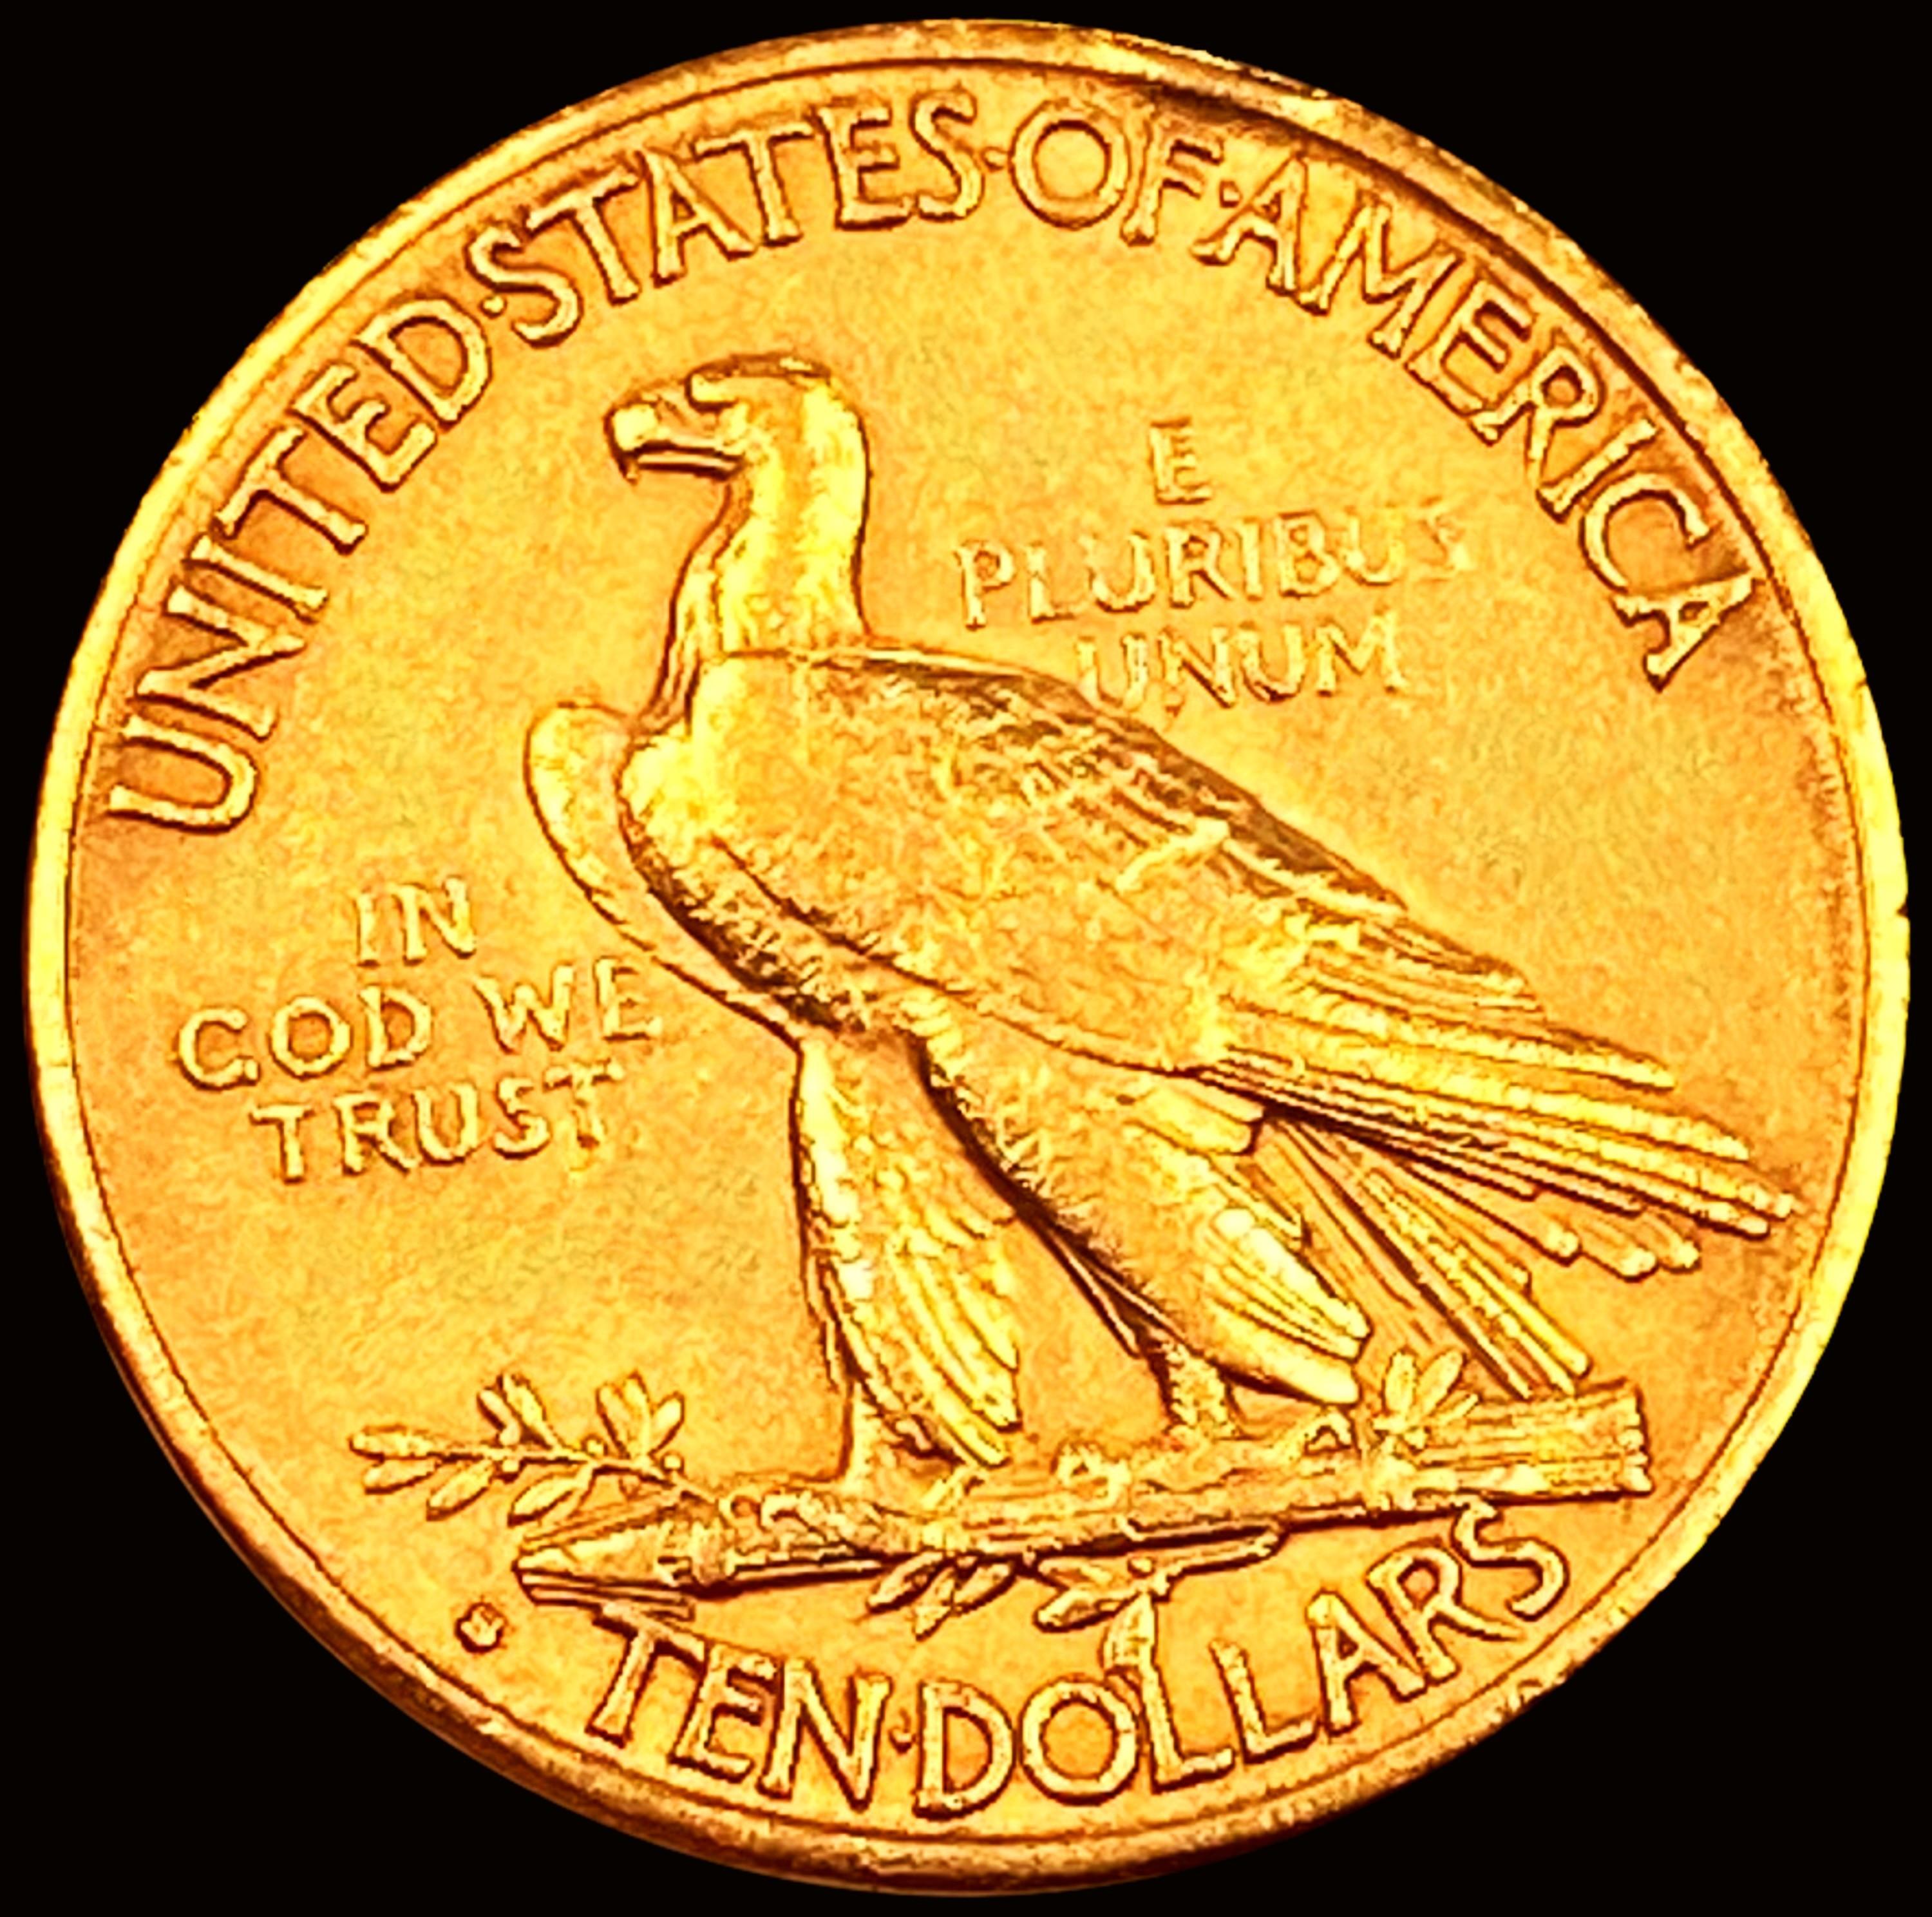 1916-S $10 Gold Eagle UNCIRCULATED